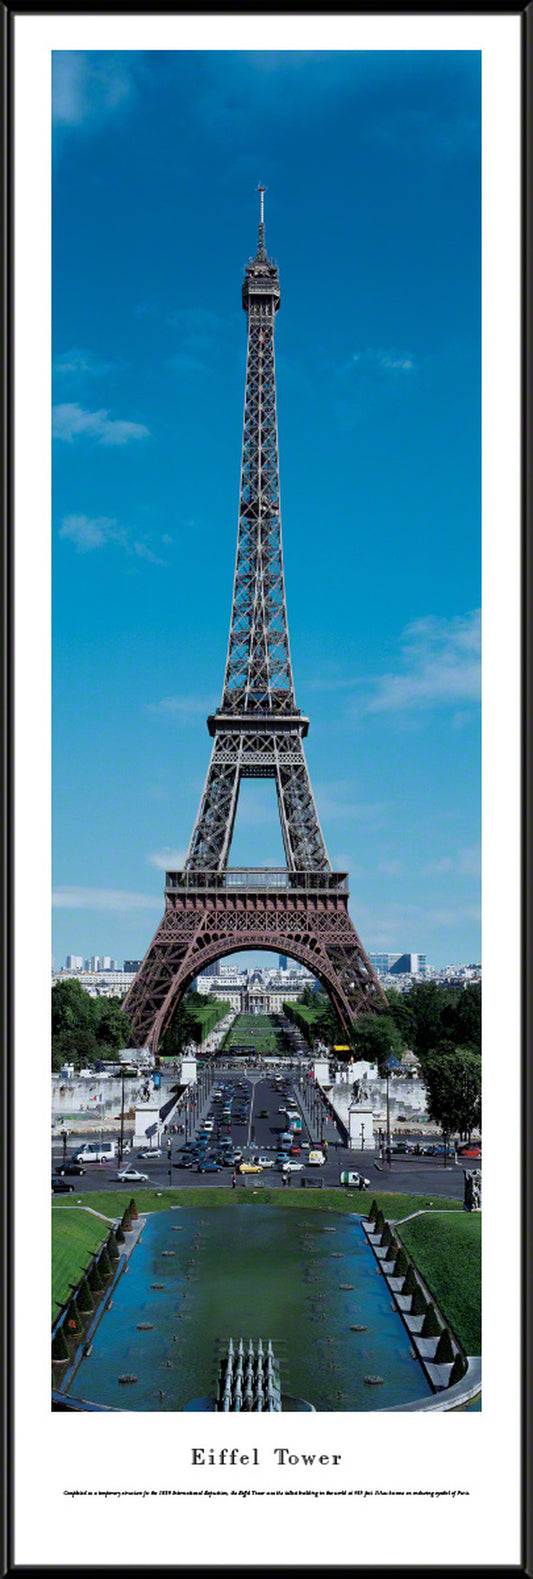 Eiffel Tower Panoramic Picture - Day - Vertical Panorama by Blakeway Panoramas